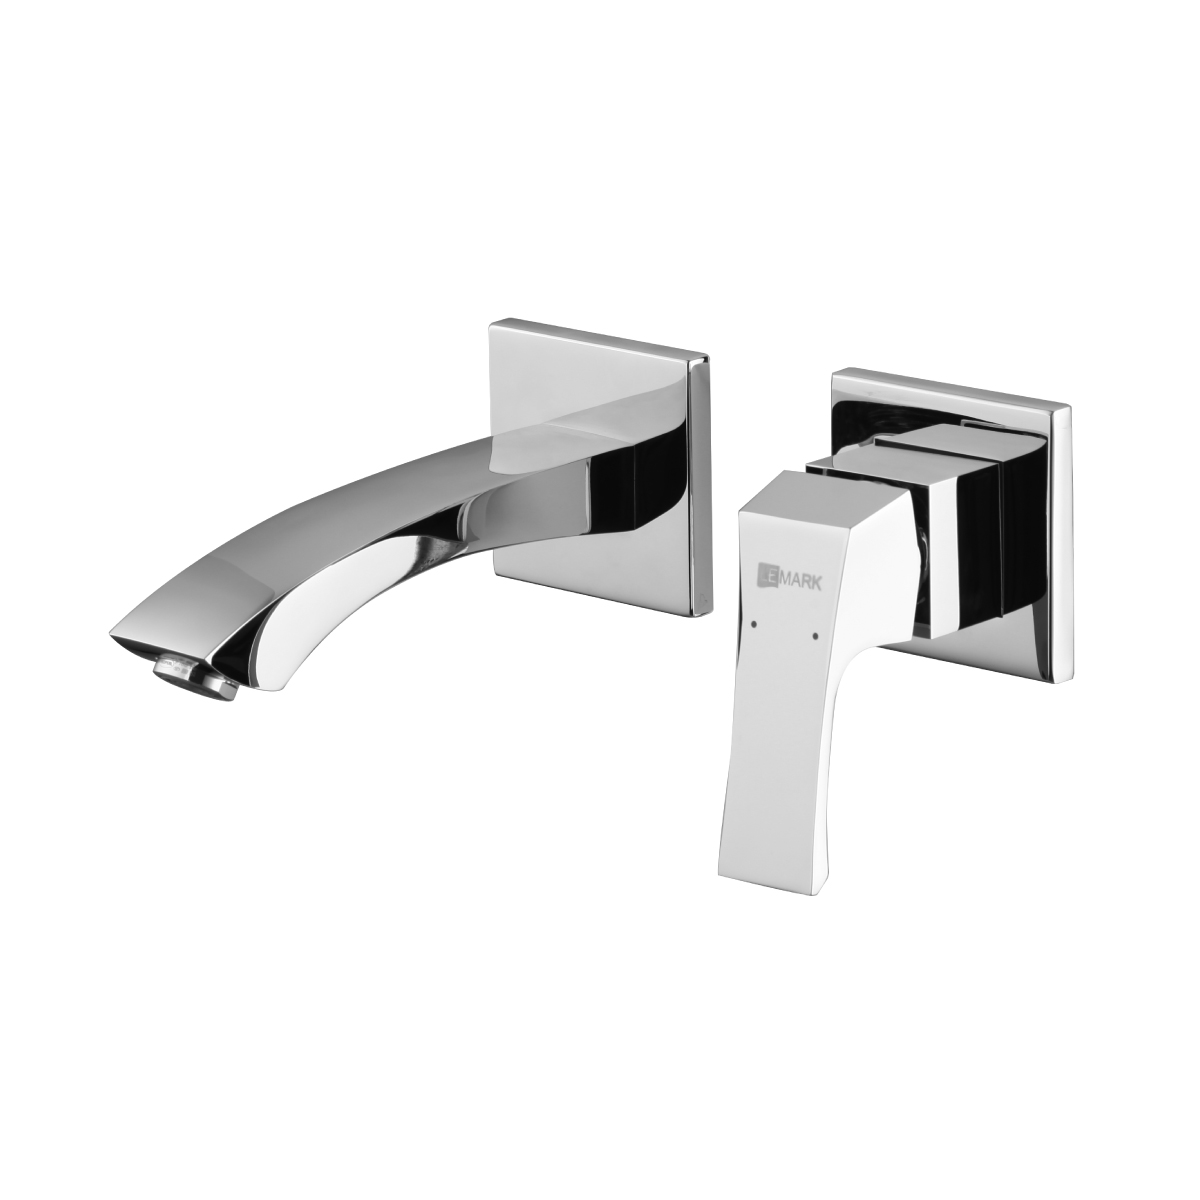 LM4526C Built-in washbasin faucet